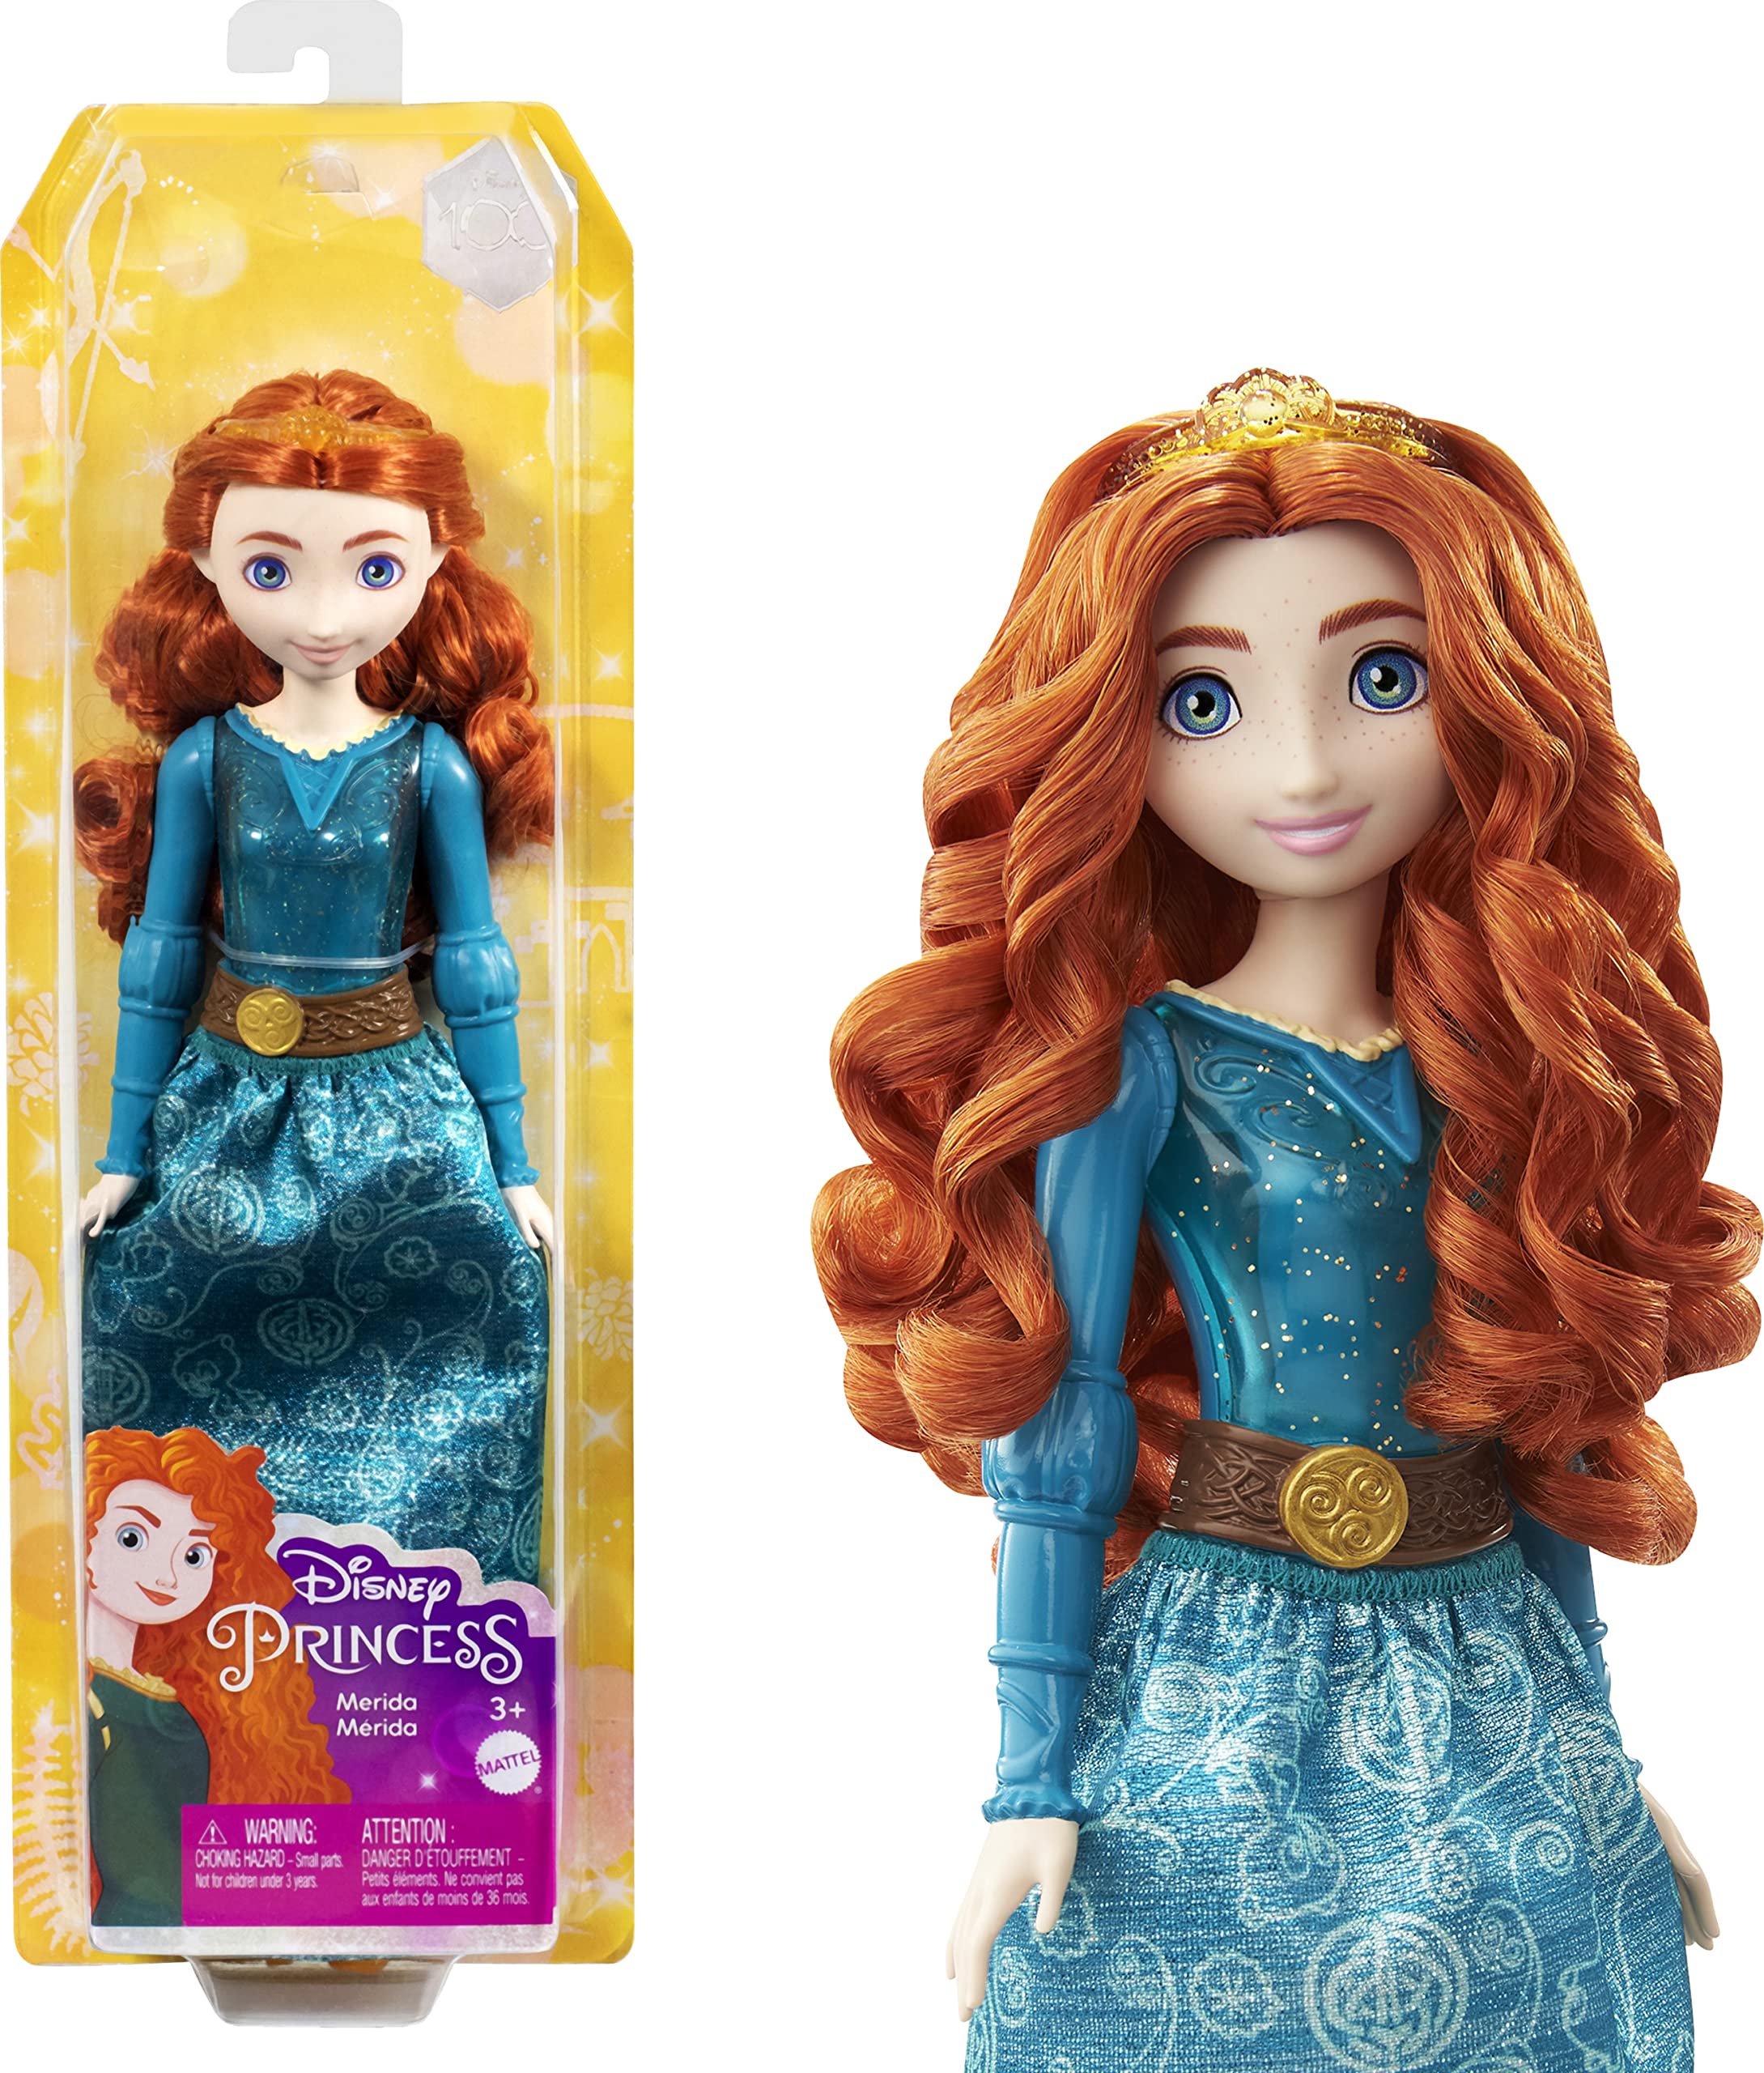 Disney Princess Merida Fashion Doll, New for 2023, Sparkling Look with Red Hair, Blue Eyes & Hair Accessory